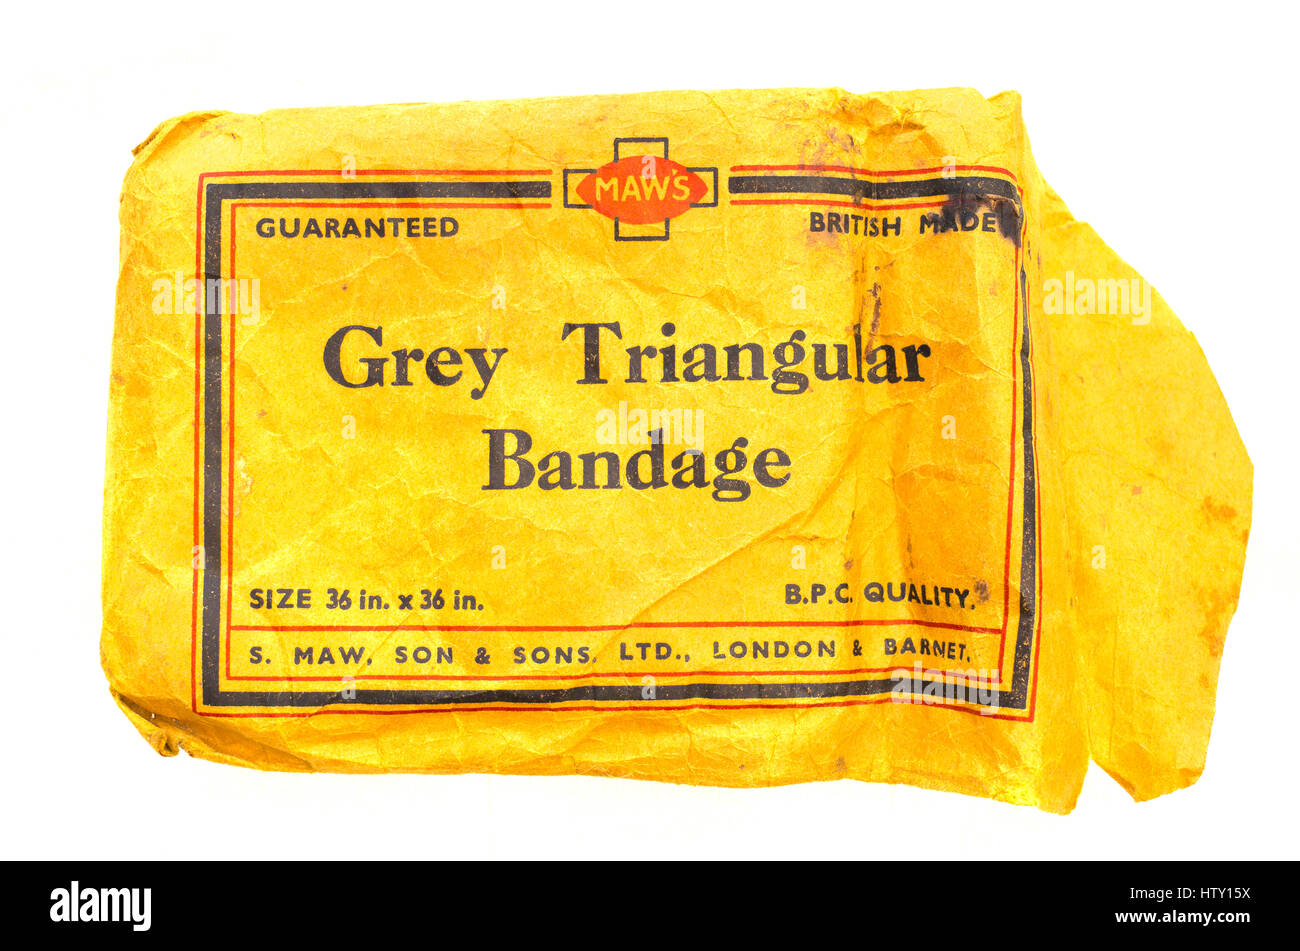 Old grey triangular bandage in original package dating from the 1940s Stock Photo